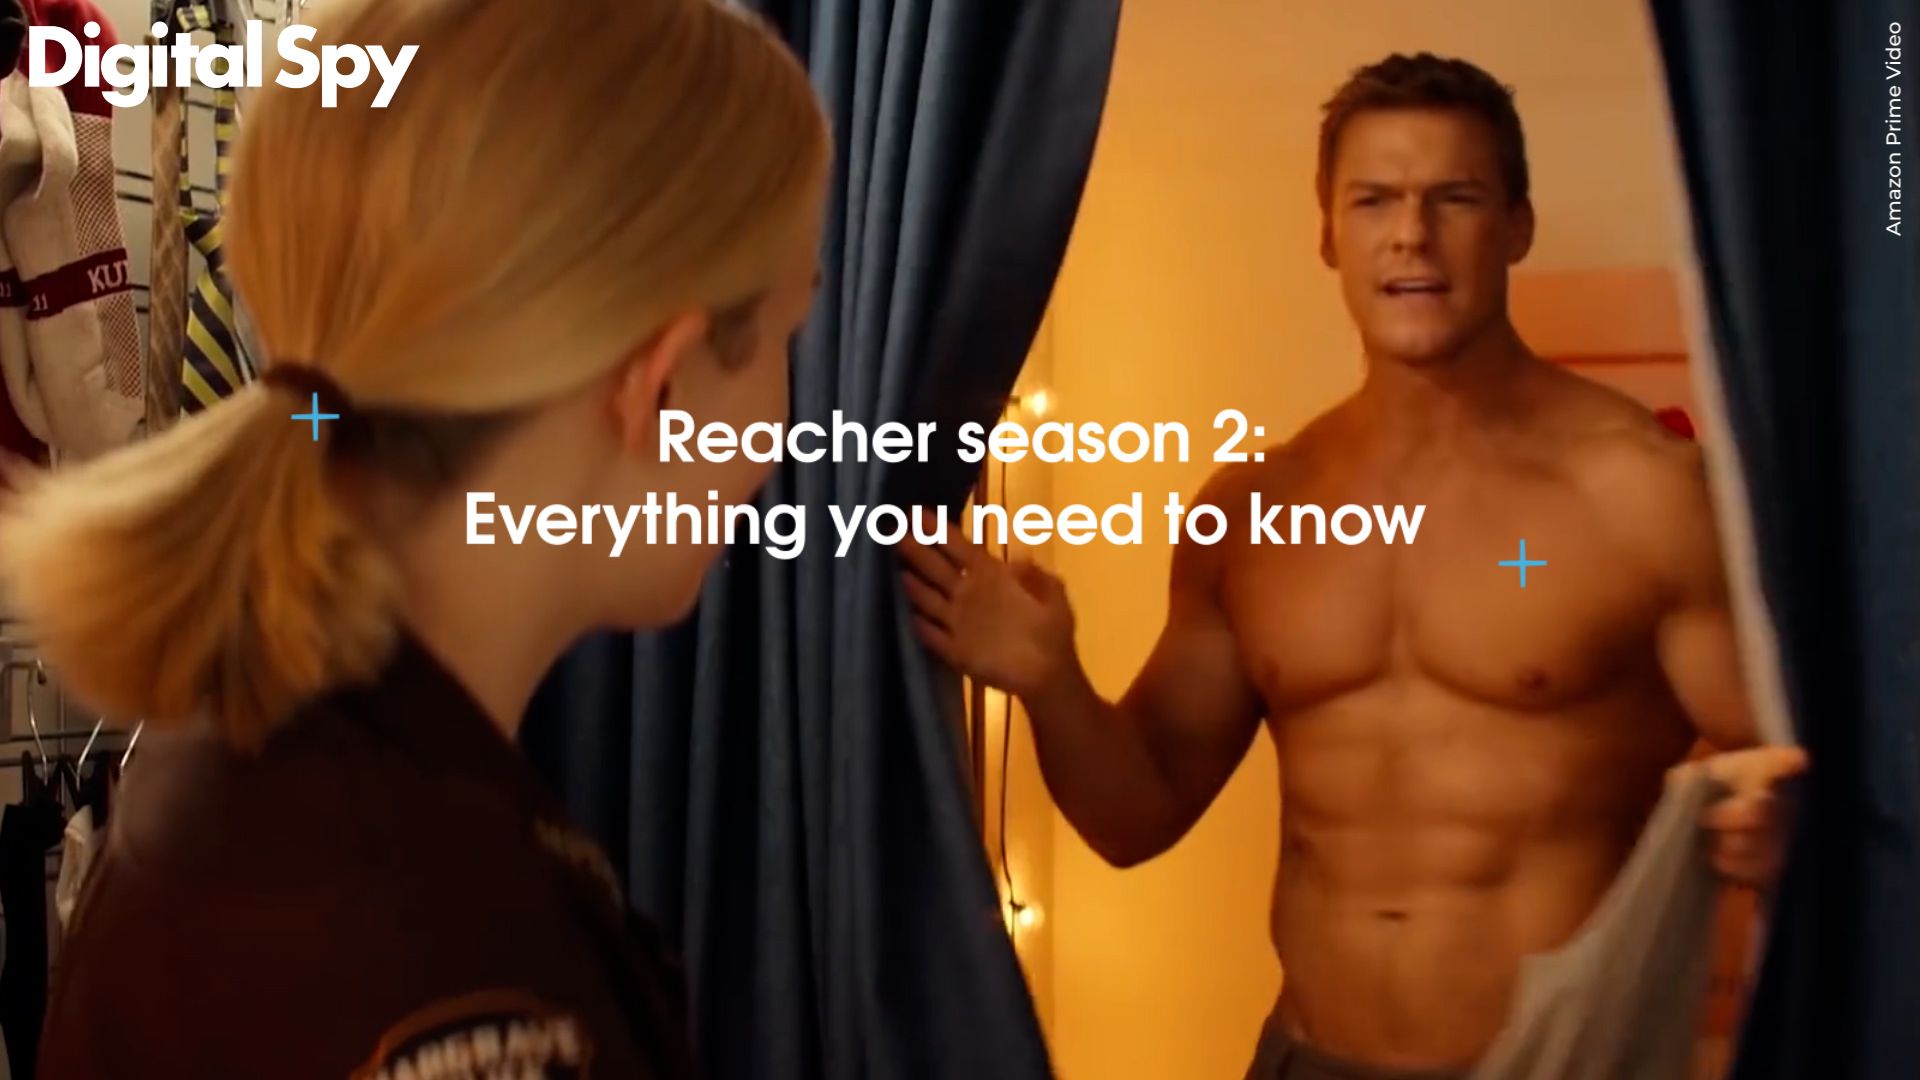 Reacher Season 2 Release Date, Trailer, Cast & What to Expect?